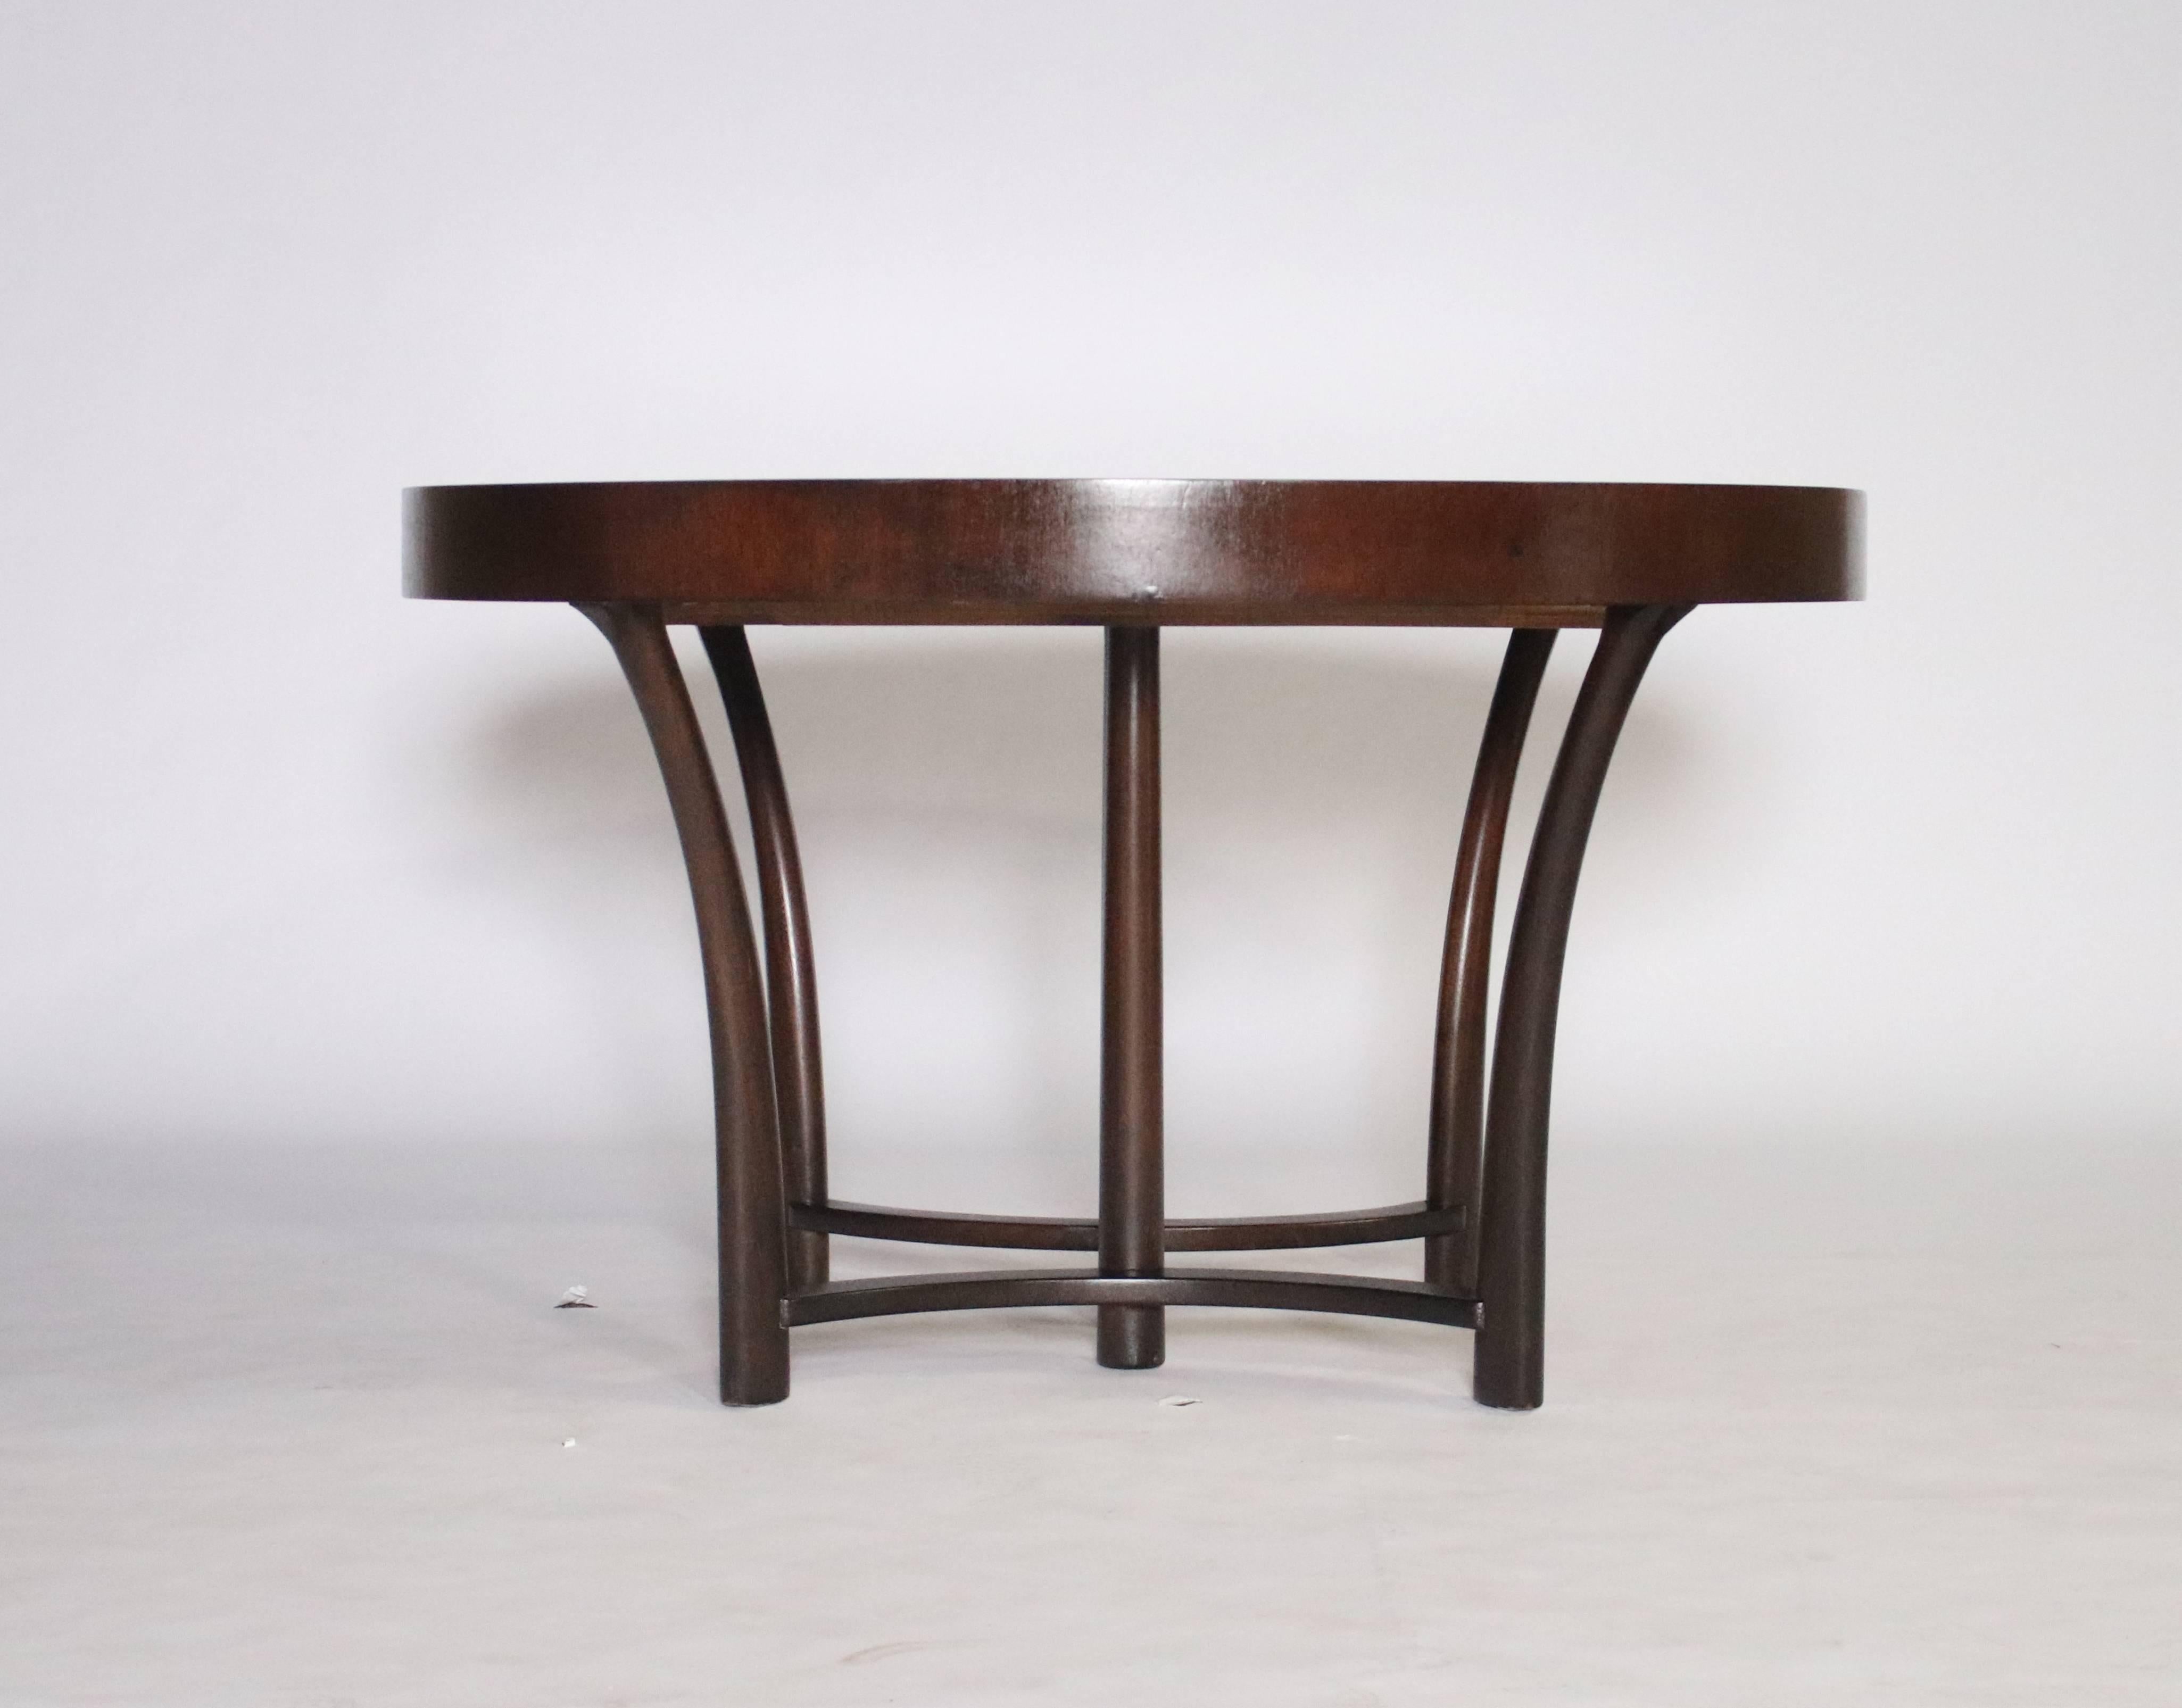 T.H. Robsjohn-Gibbings style extension dining table by Widdicomb, circa 1938 in mahogany with sunburst parquetry top. Extendable table includes 3 leaves all consistent with the color of the table totaling 84